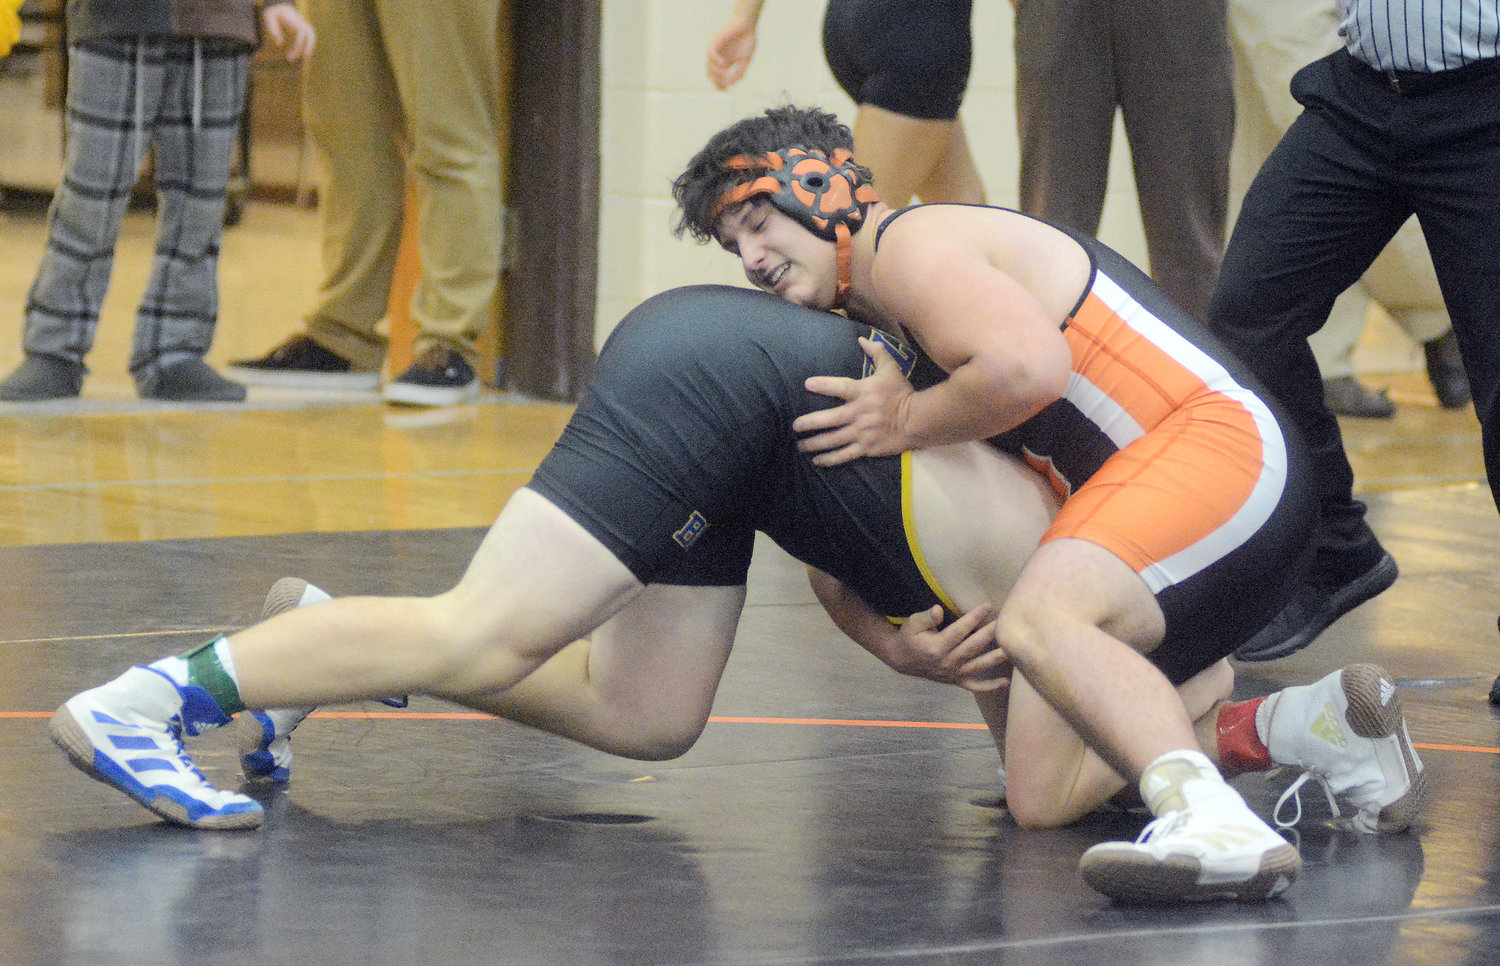 Logan Bailey wrestles against St. Francis Borgia’s Will Clarkson in the 195A pound weight class for Owensville during their annual JV Wrestling Tournament held Monday, Dec. 20 prior to Christmas break.